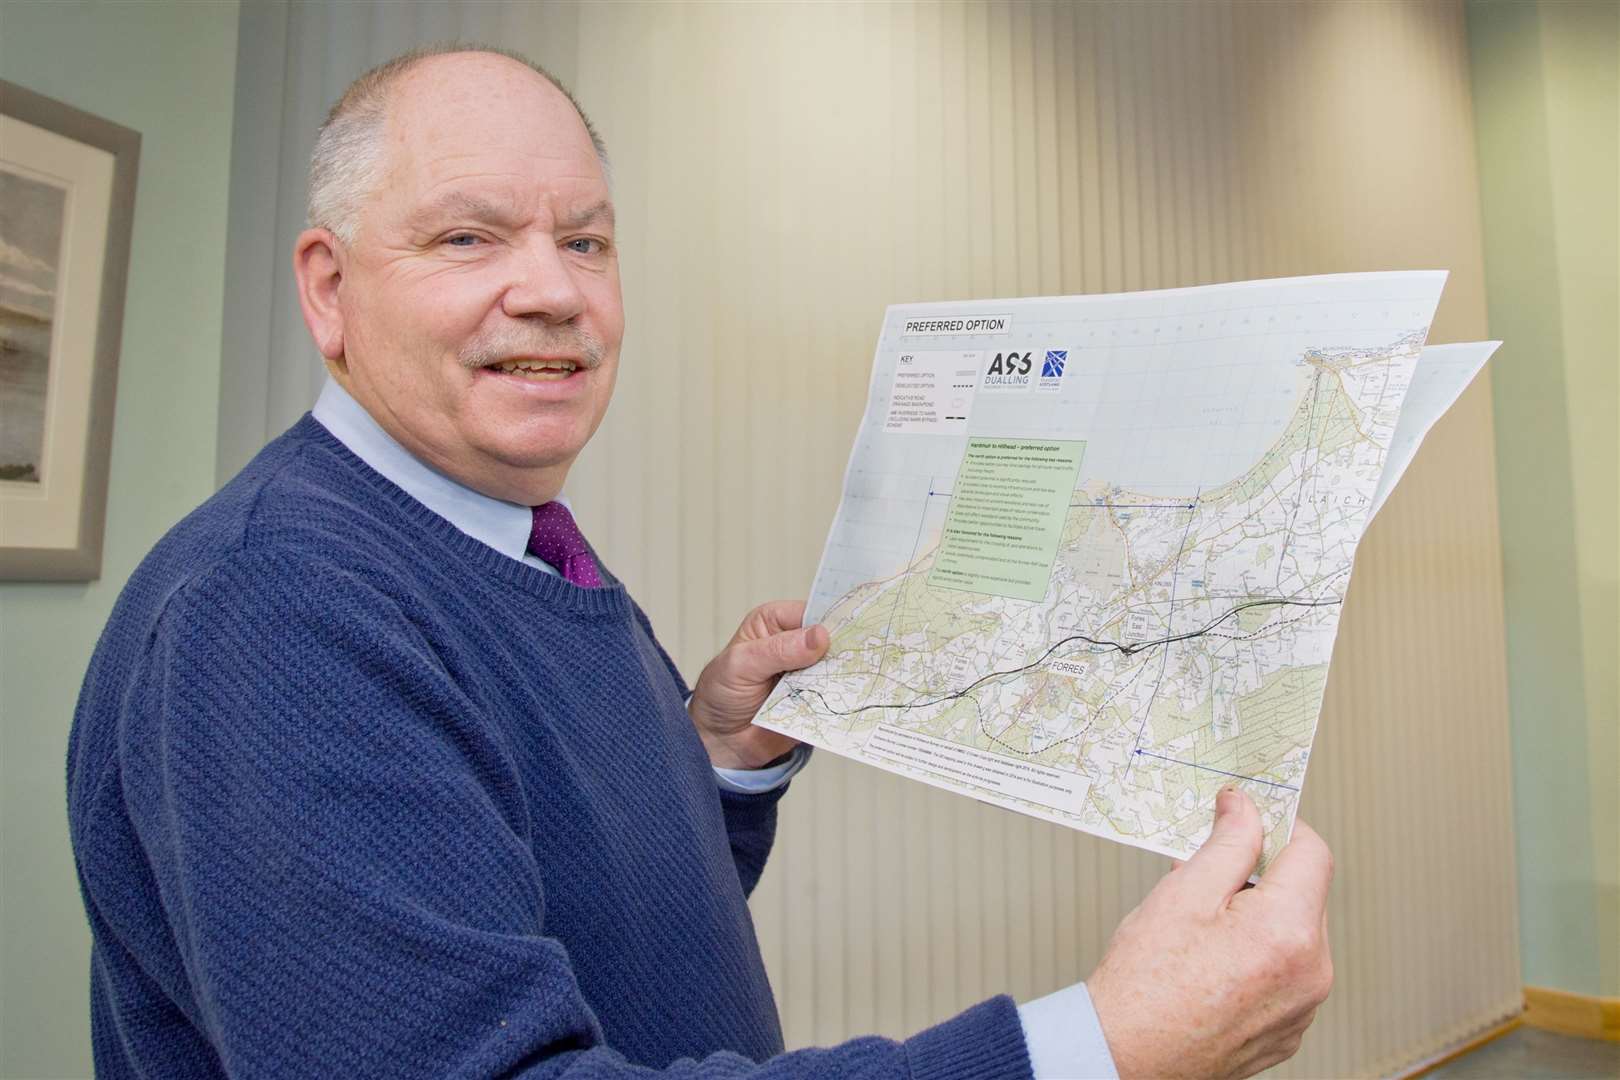 Alan James, who is a director at AJ Engineering, is unhappy with the chosen route which passes north of Forres. Picture: Daniel Forsyth. Image No.043010.